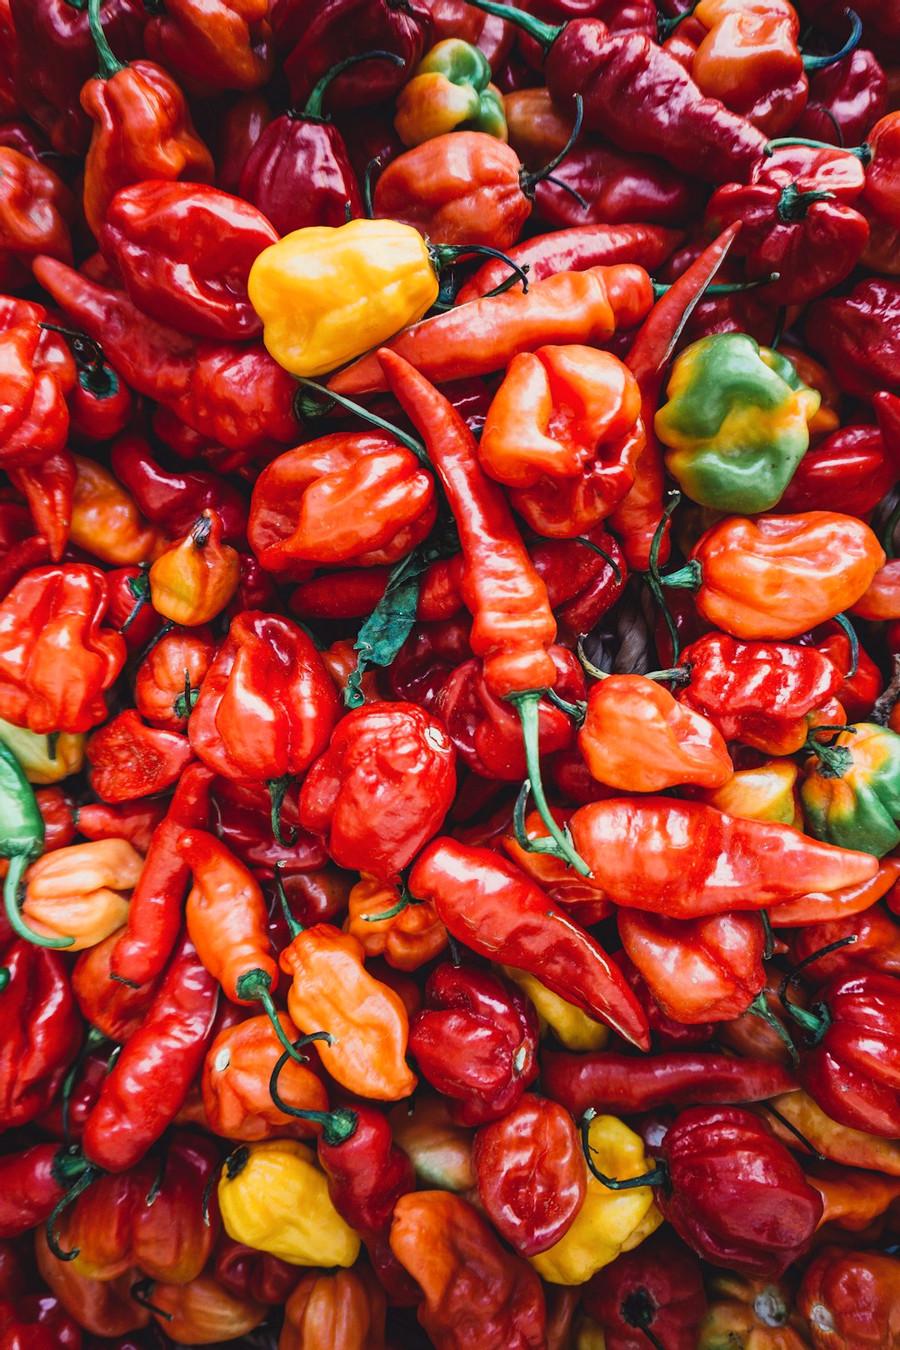 How is it possible that spicy food can cause heartburn?